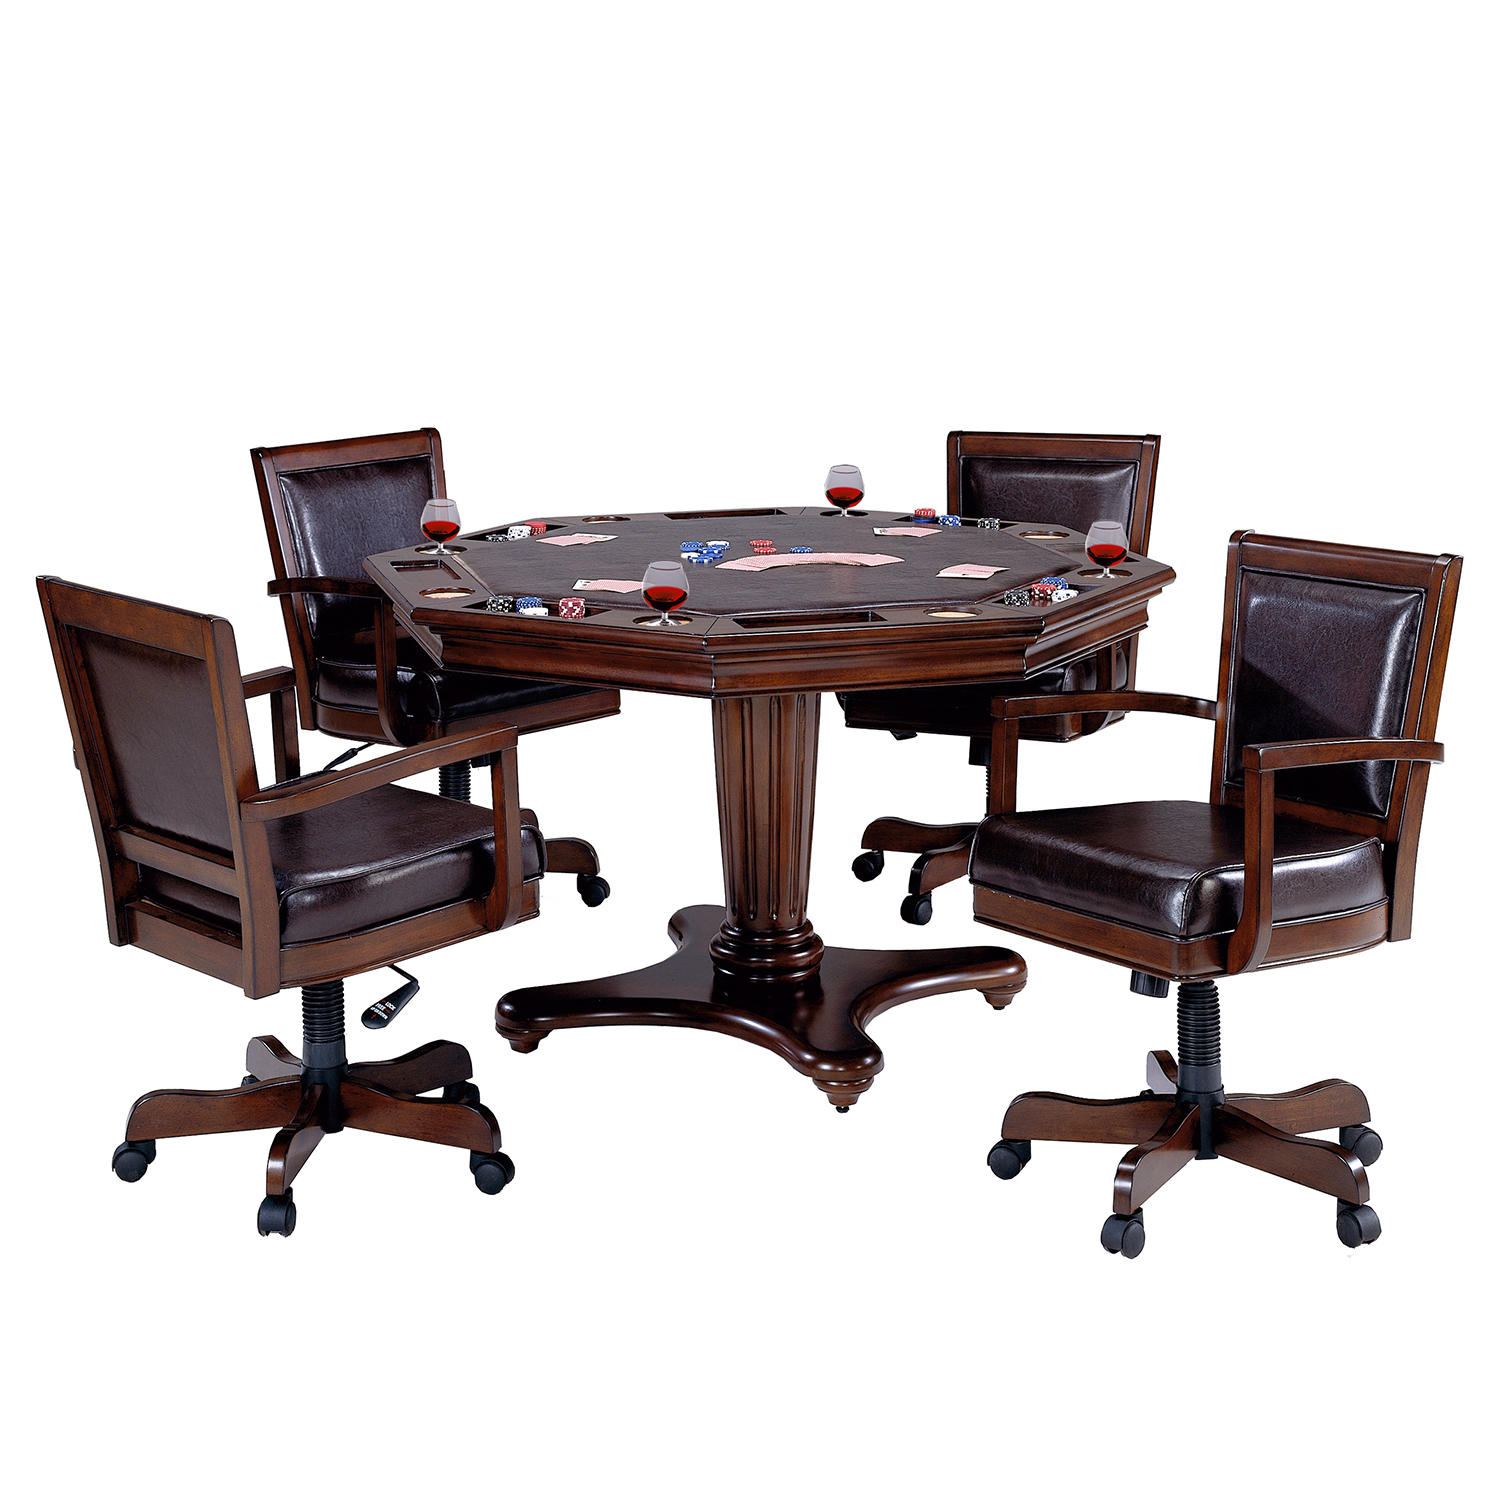 Hillsdale Furniture Ambassador 5 Piece Game Table and Chairs Set